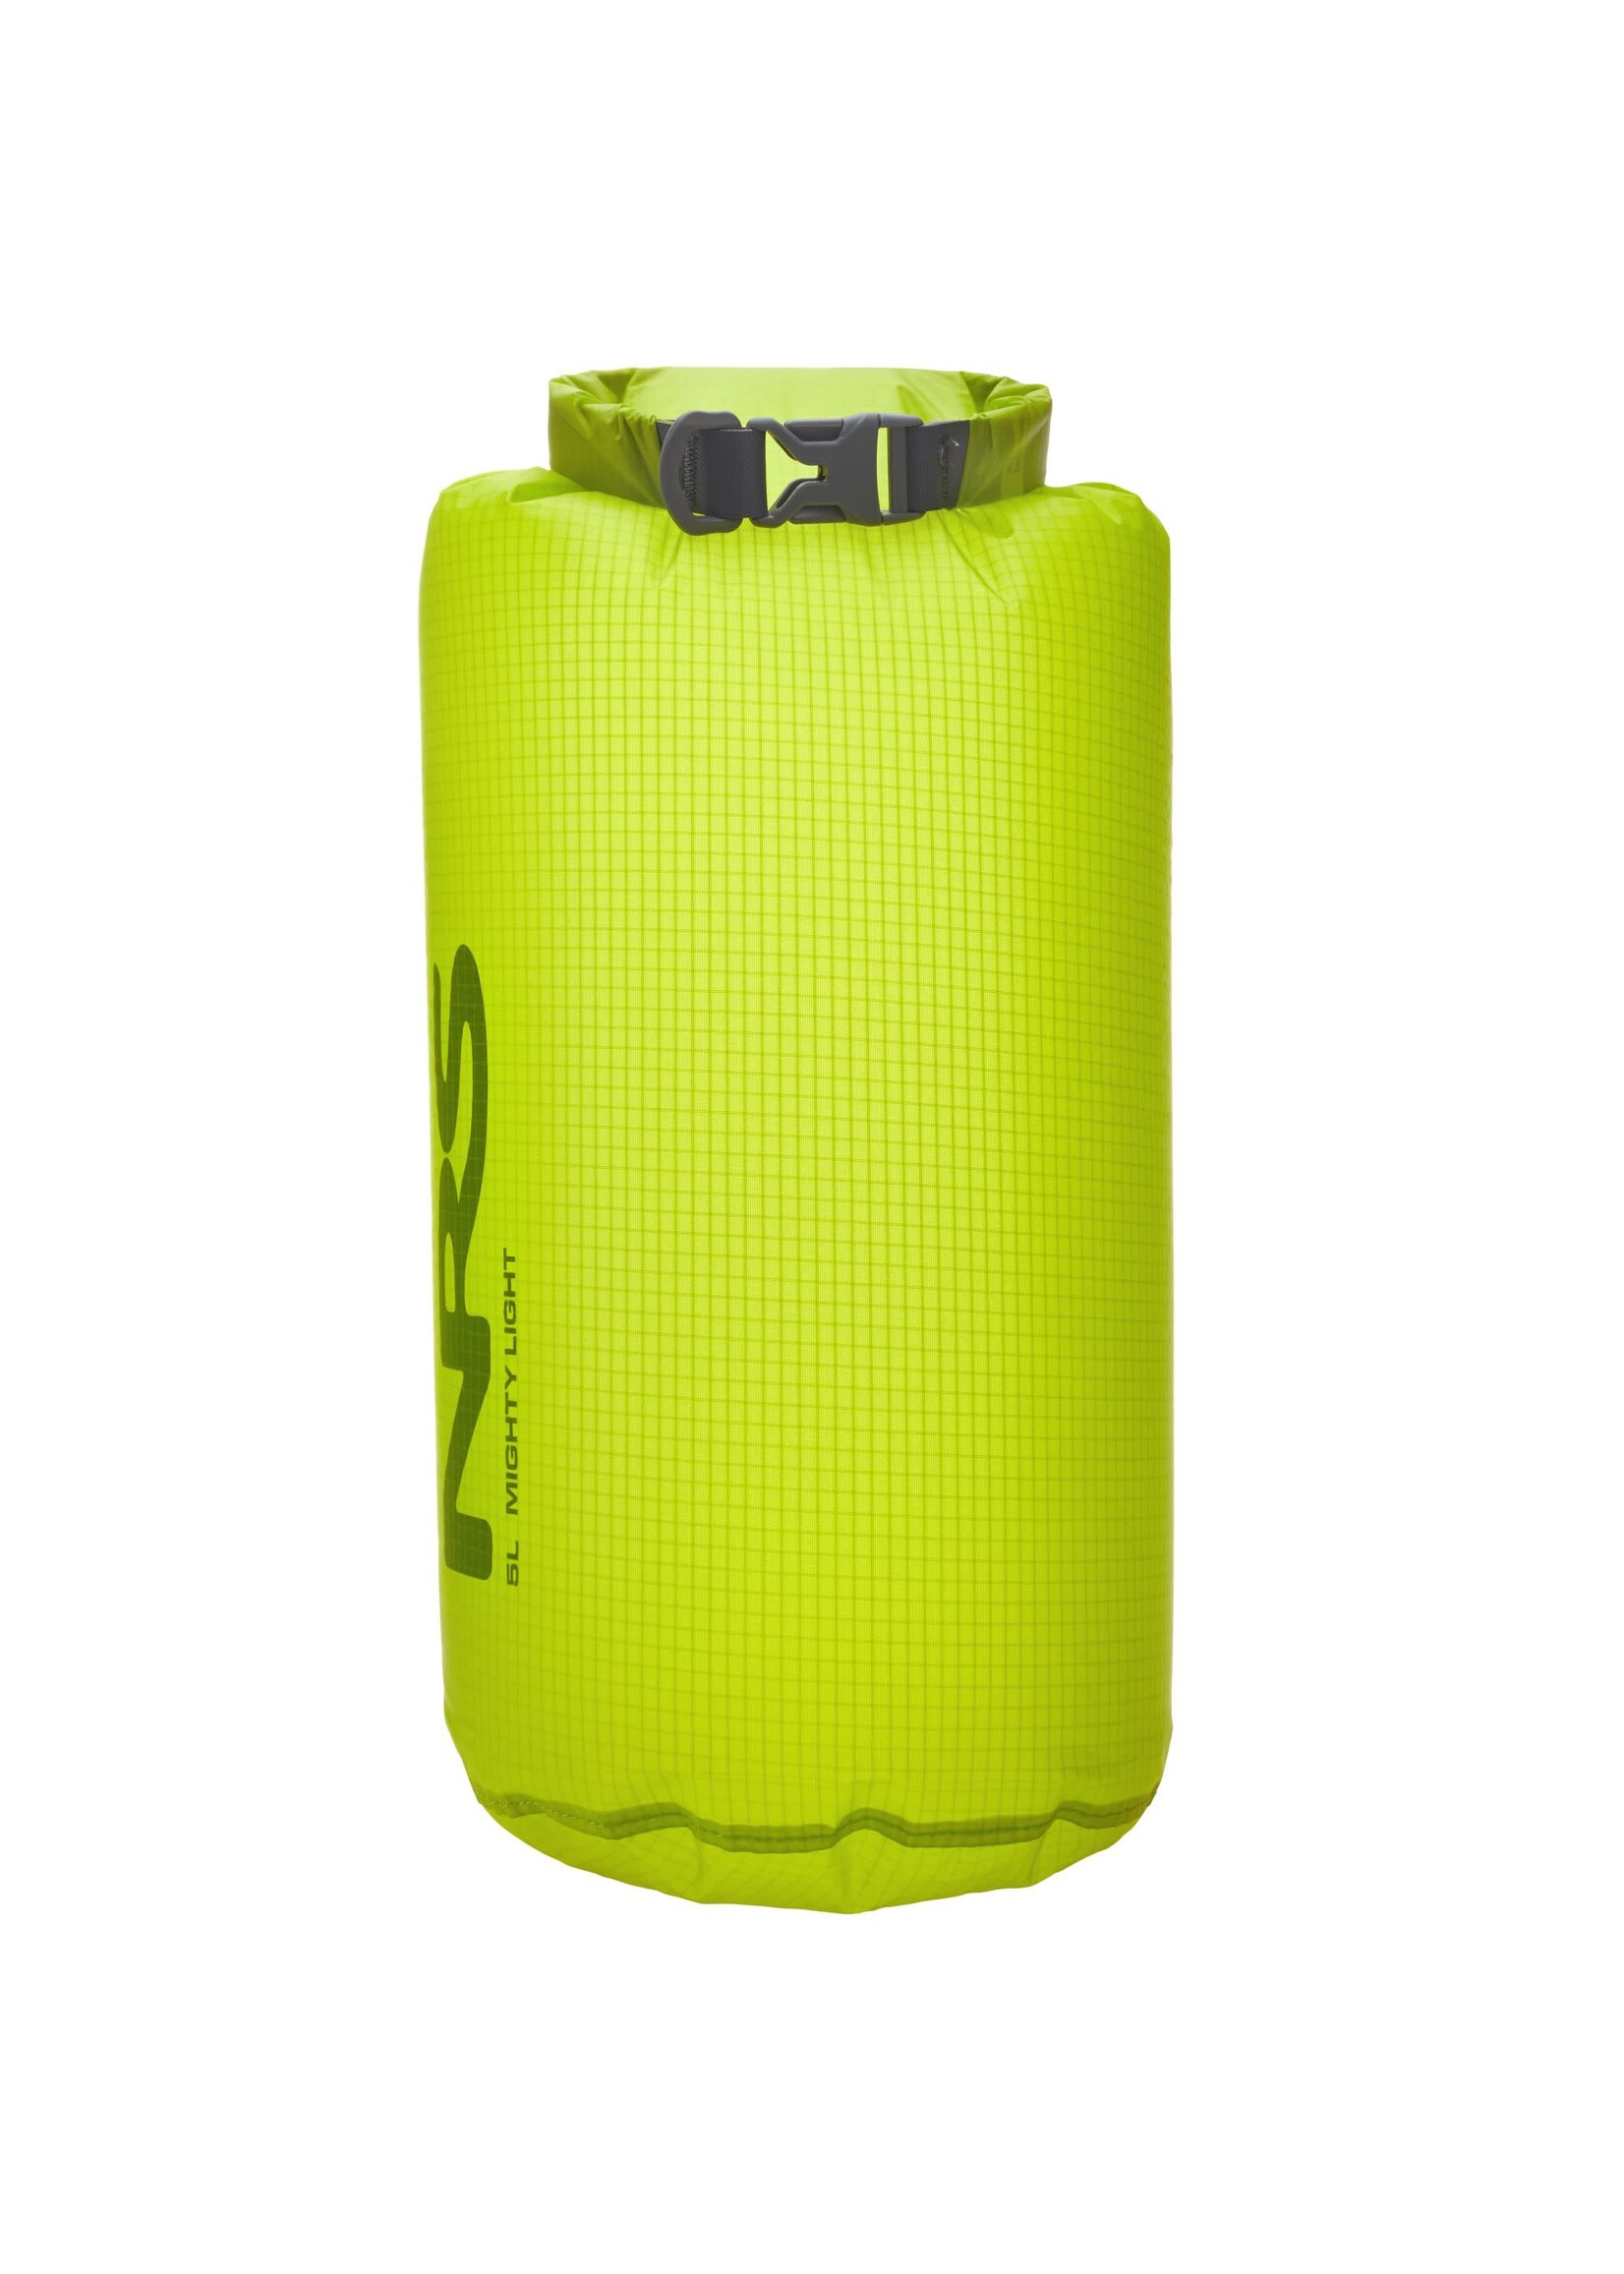 NRS NRS MightyLight Dry Sack - 3L Lime